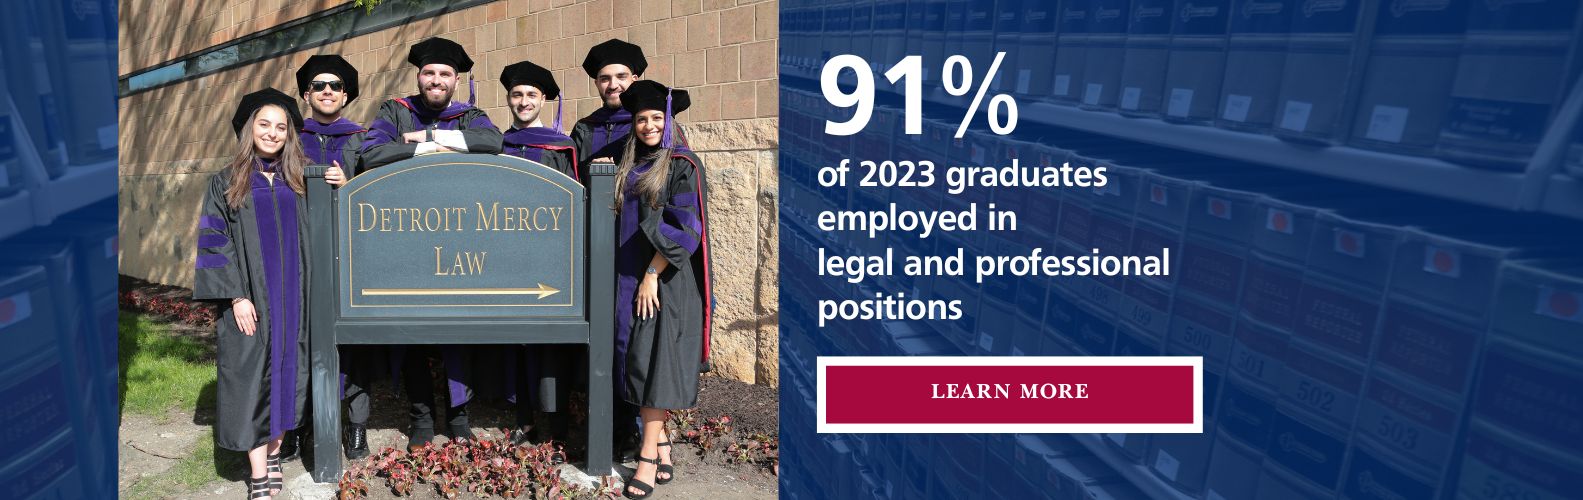 90% of 2022 graduates employed in legal positions